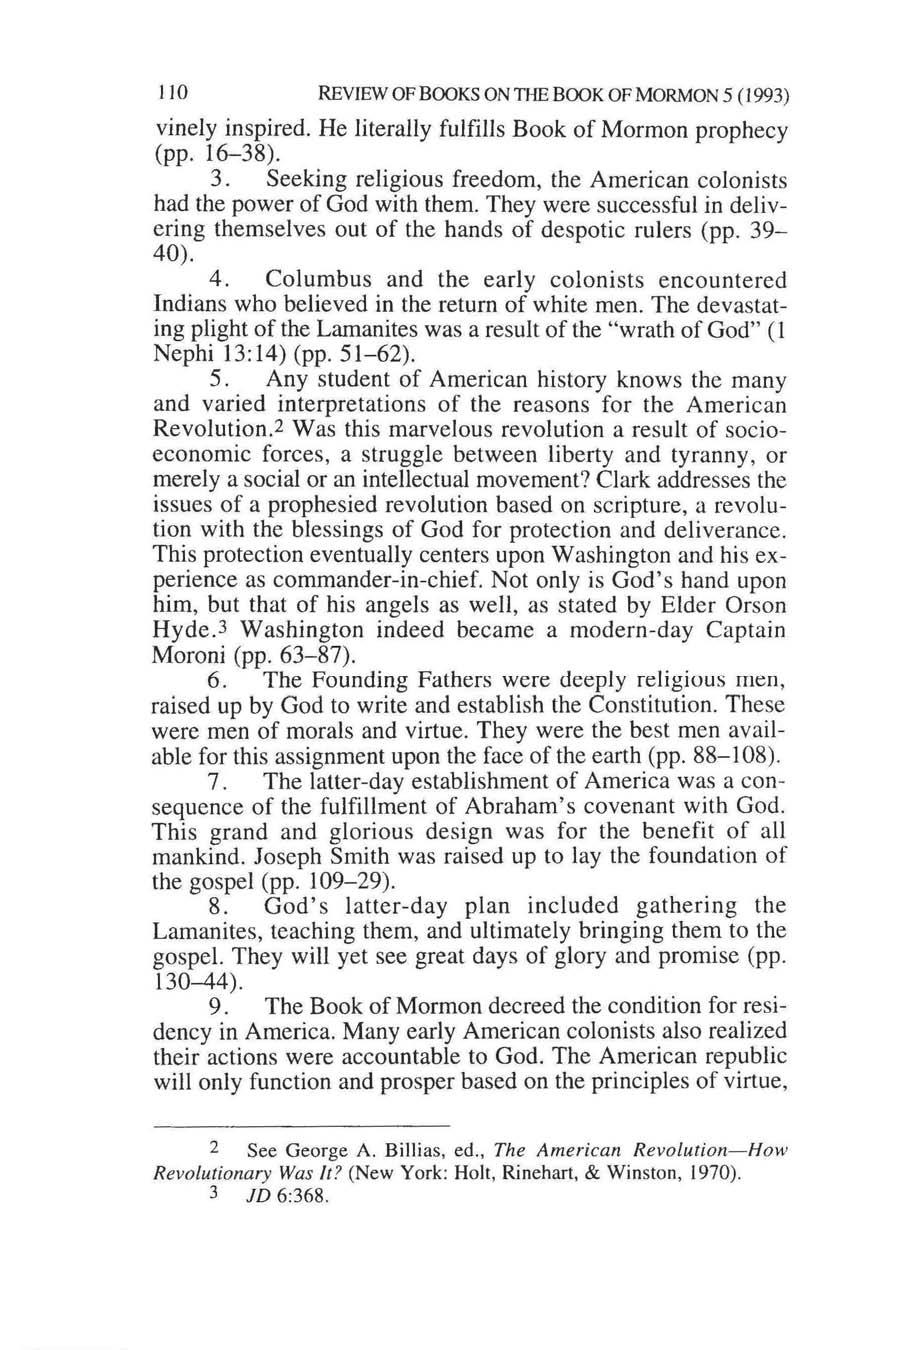 110 REVIEW QF BOOKS ON TI1E BOOK OF MORMON 5 (1993) vineiy inspired. He literally fulfills Book of Mormon prophecy (pp. 16-38). 3.